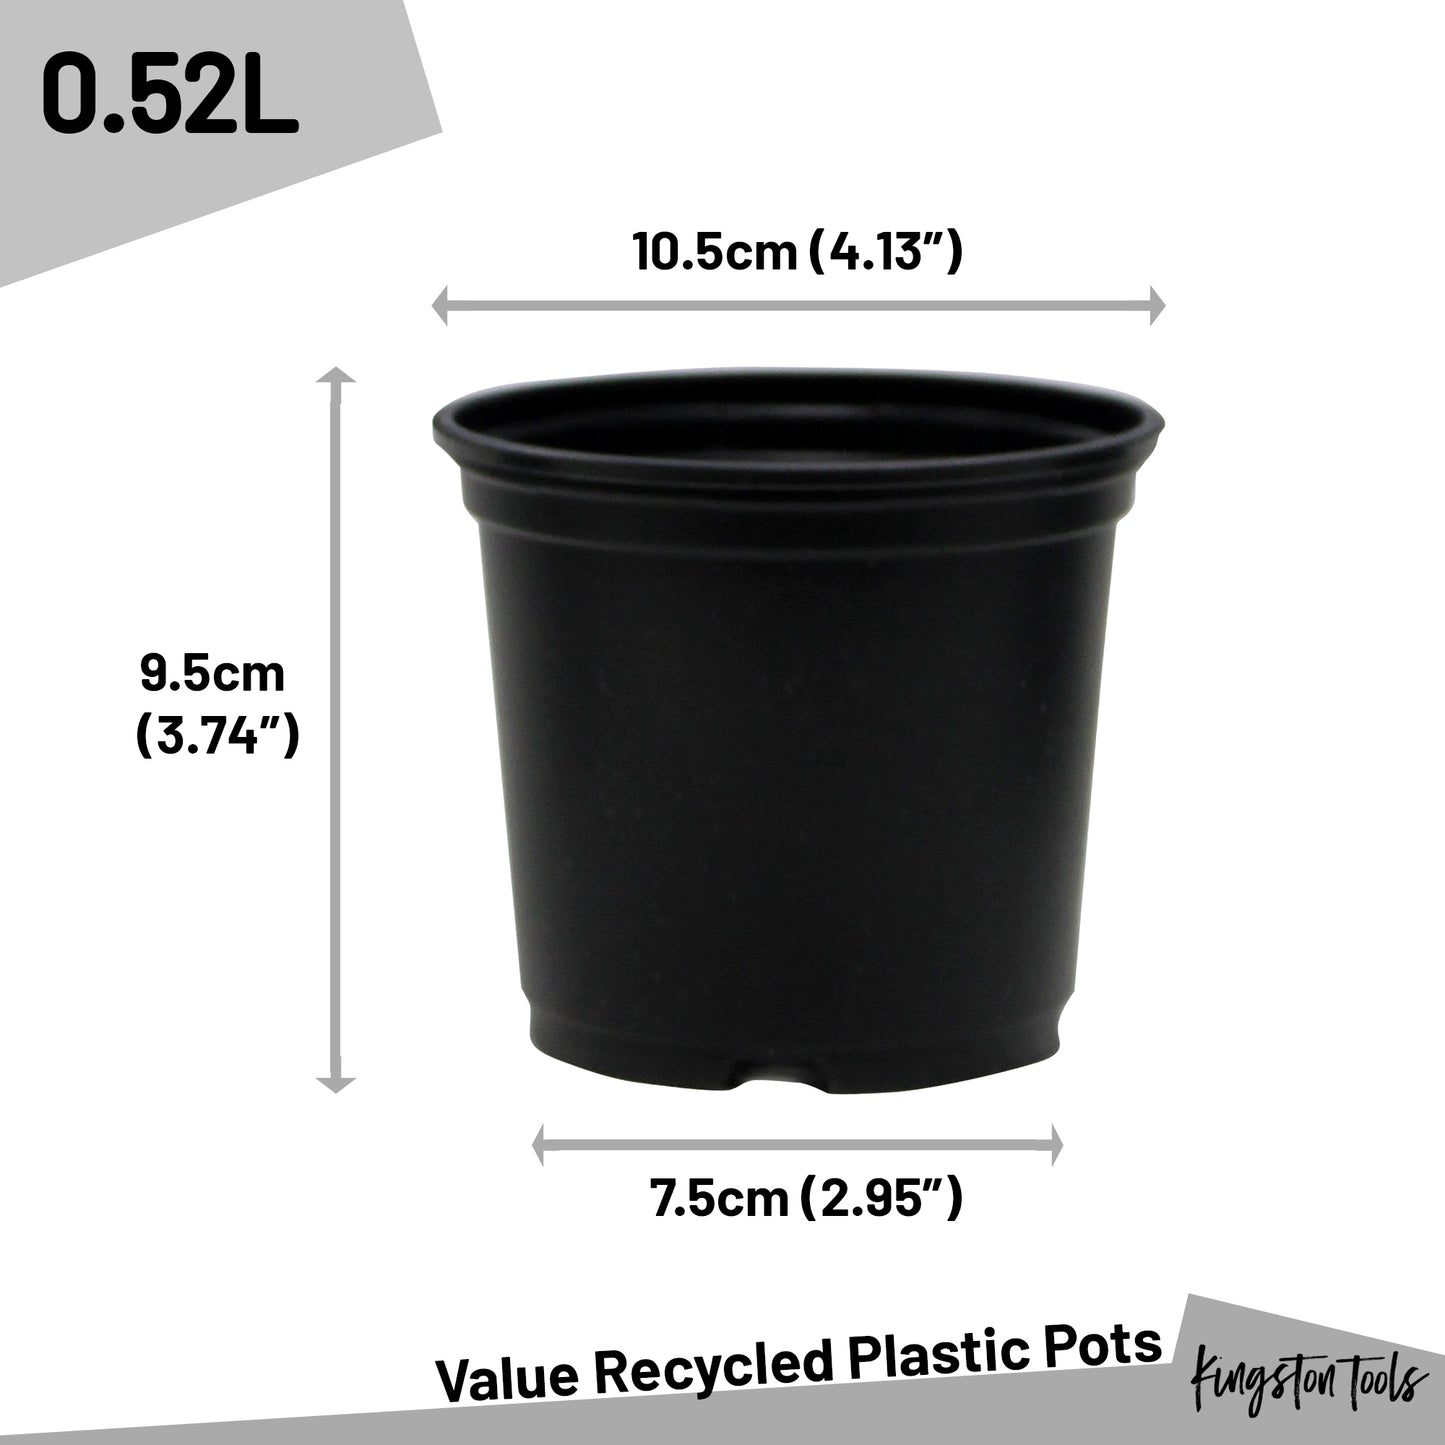 Thermo Formed Growing Pots - Recycled Plastic & Made in the UK